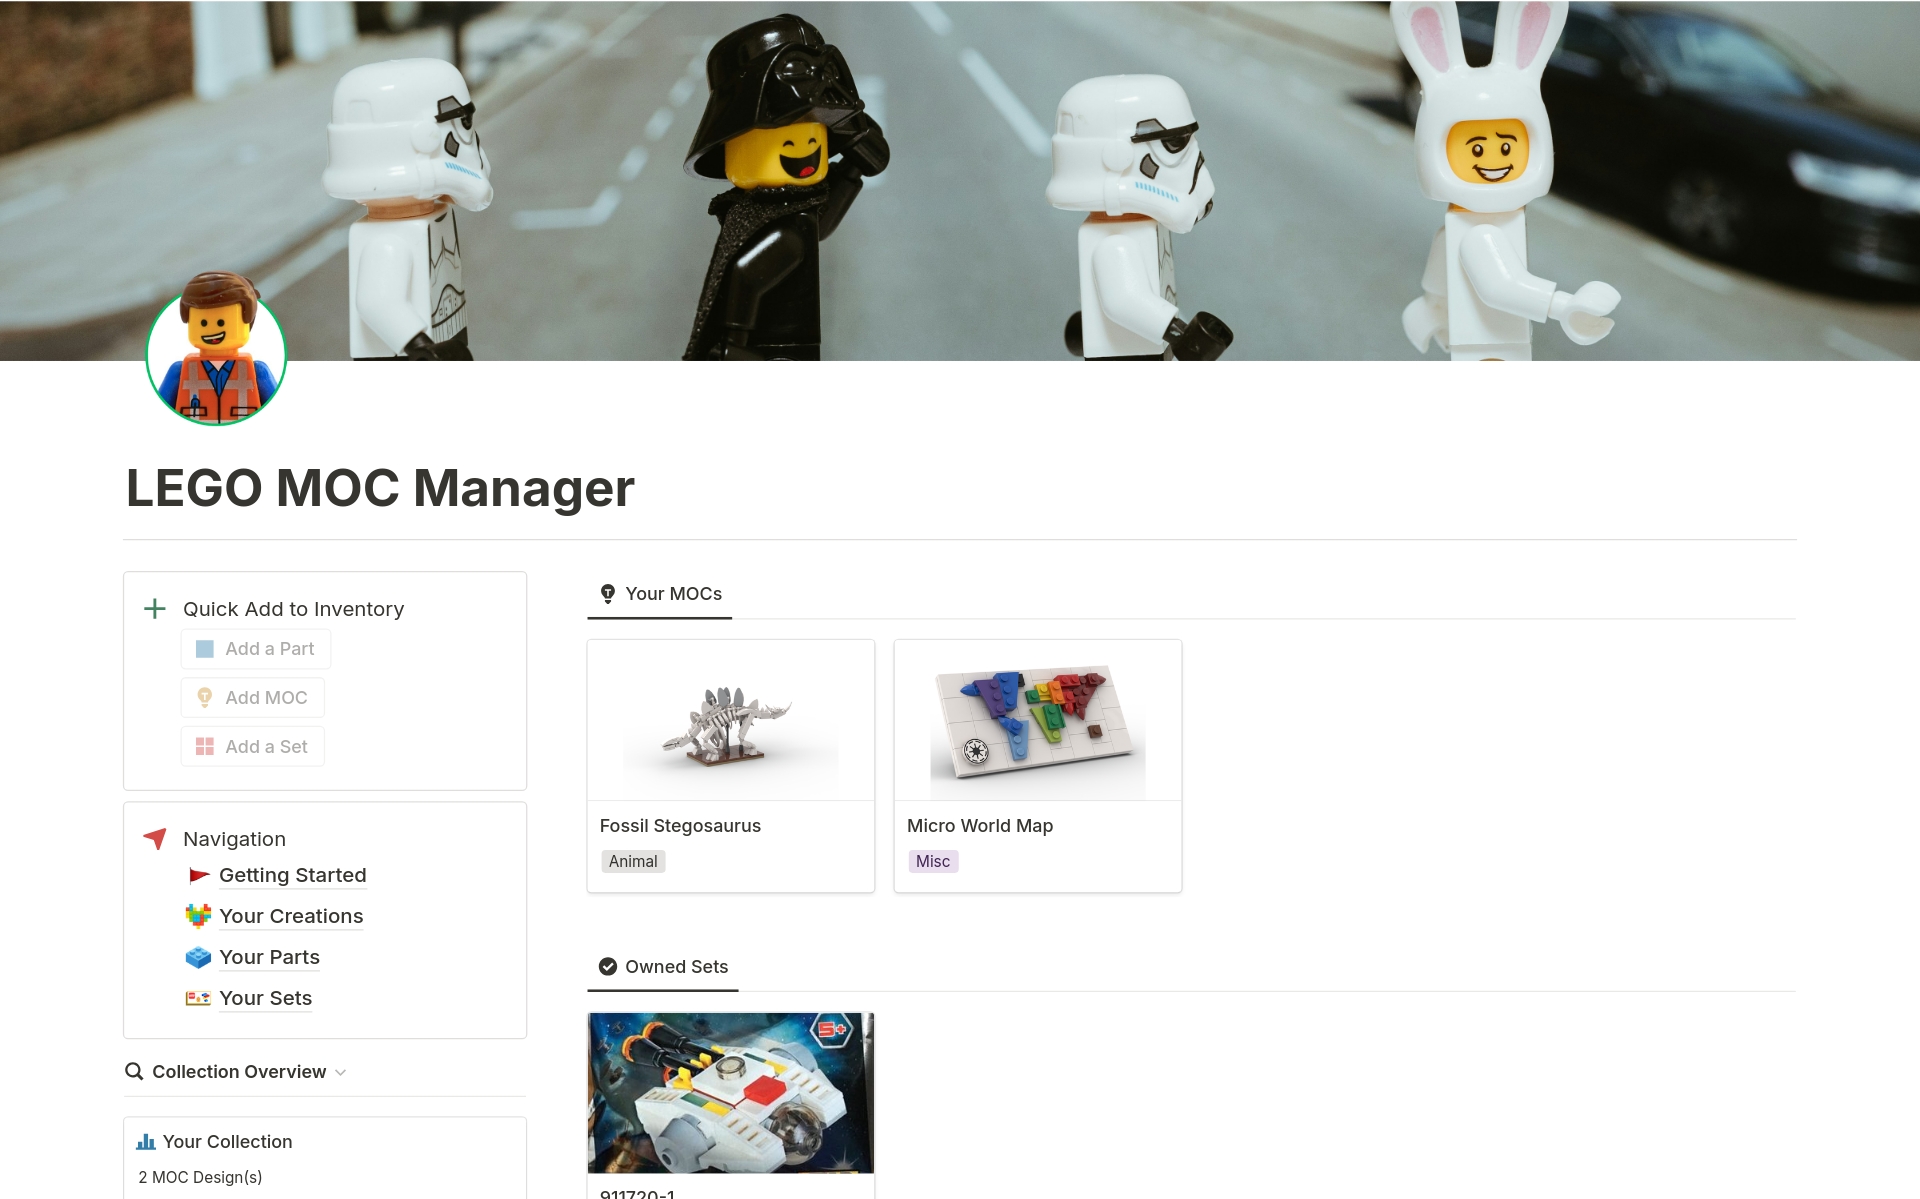 Are you a LEGO fan who loves to create your own custom models (MOCs)? Do you want to keep track of your LEGO parts, sets, and MOCs in one place? If so, you need the Notion LEGO MOC Manager template!